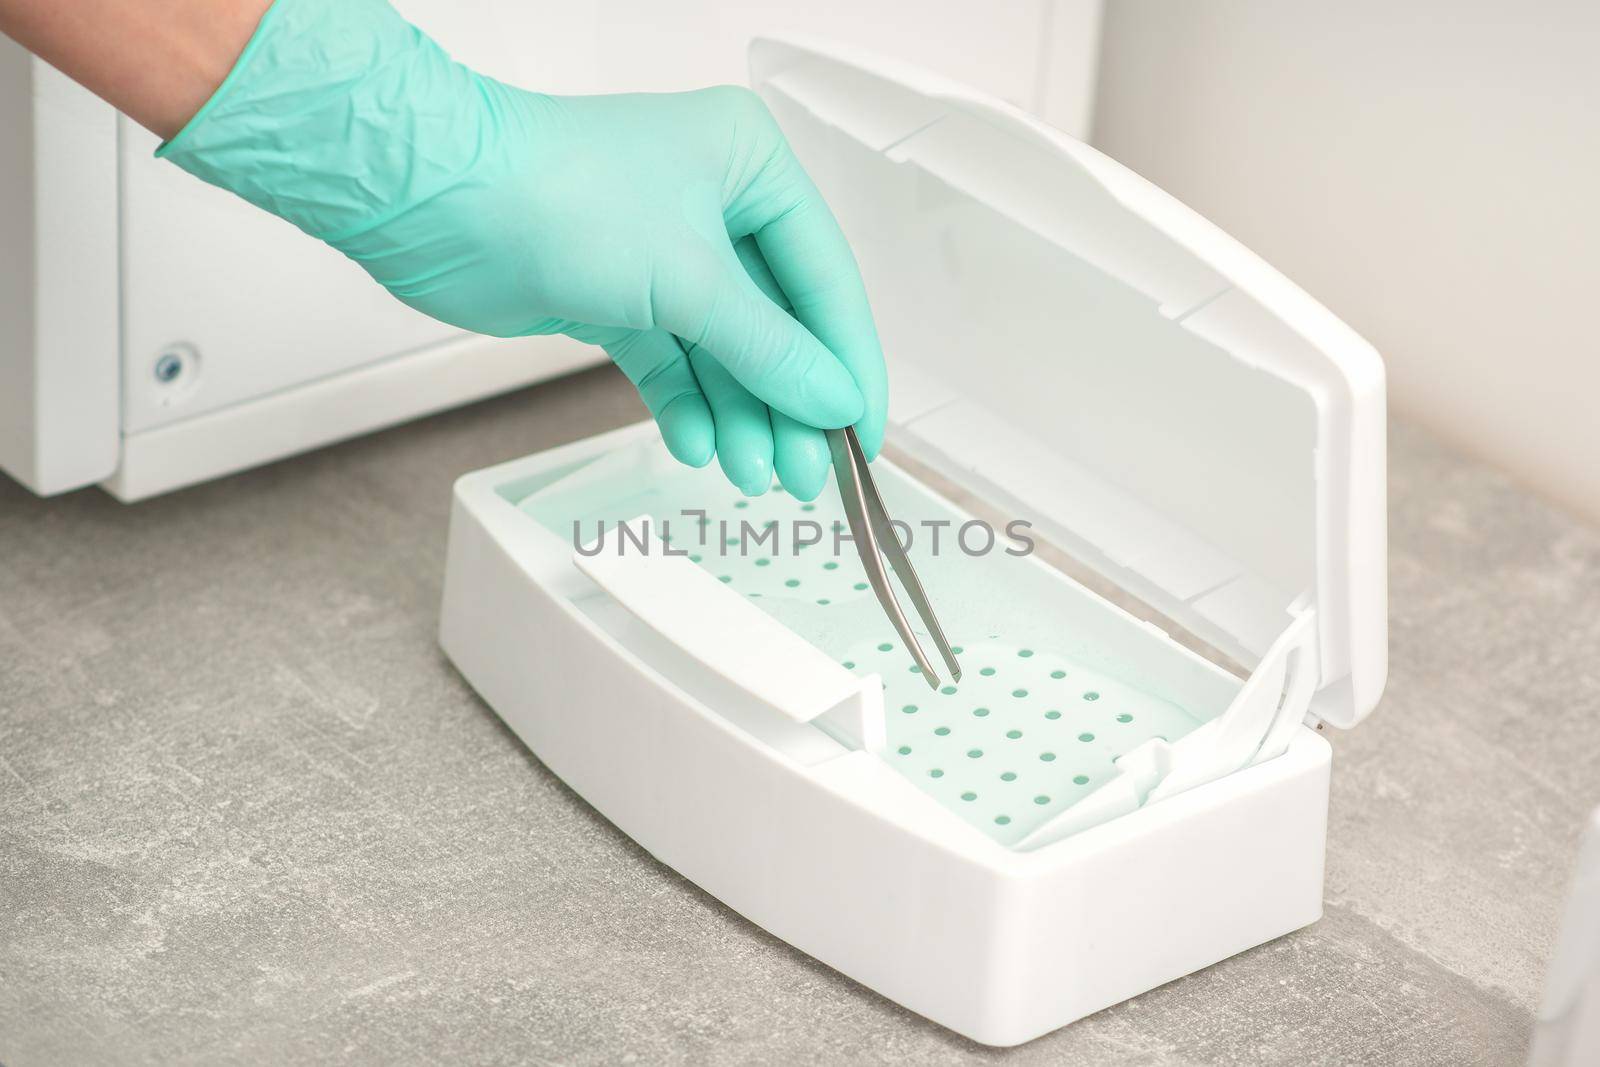 Hand disinfects tweezers with cleaning systems for medical instruments. Ultrasonic cleaner. by okskukuruza